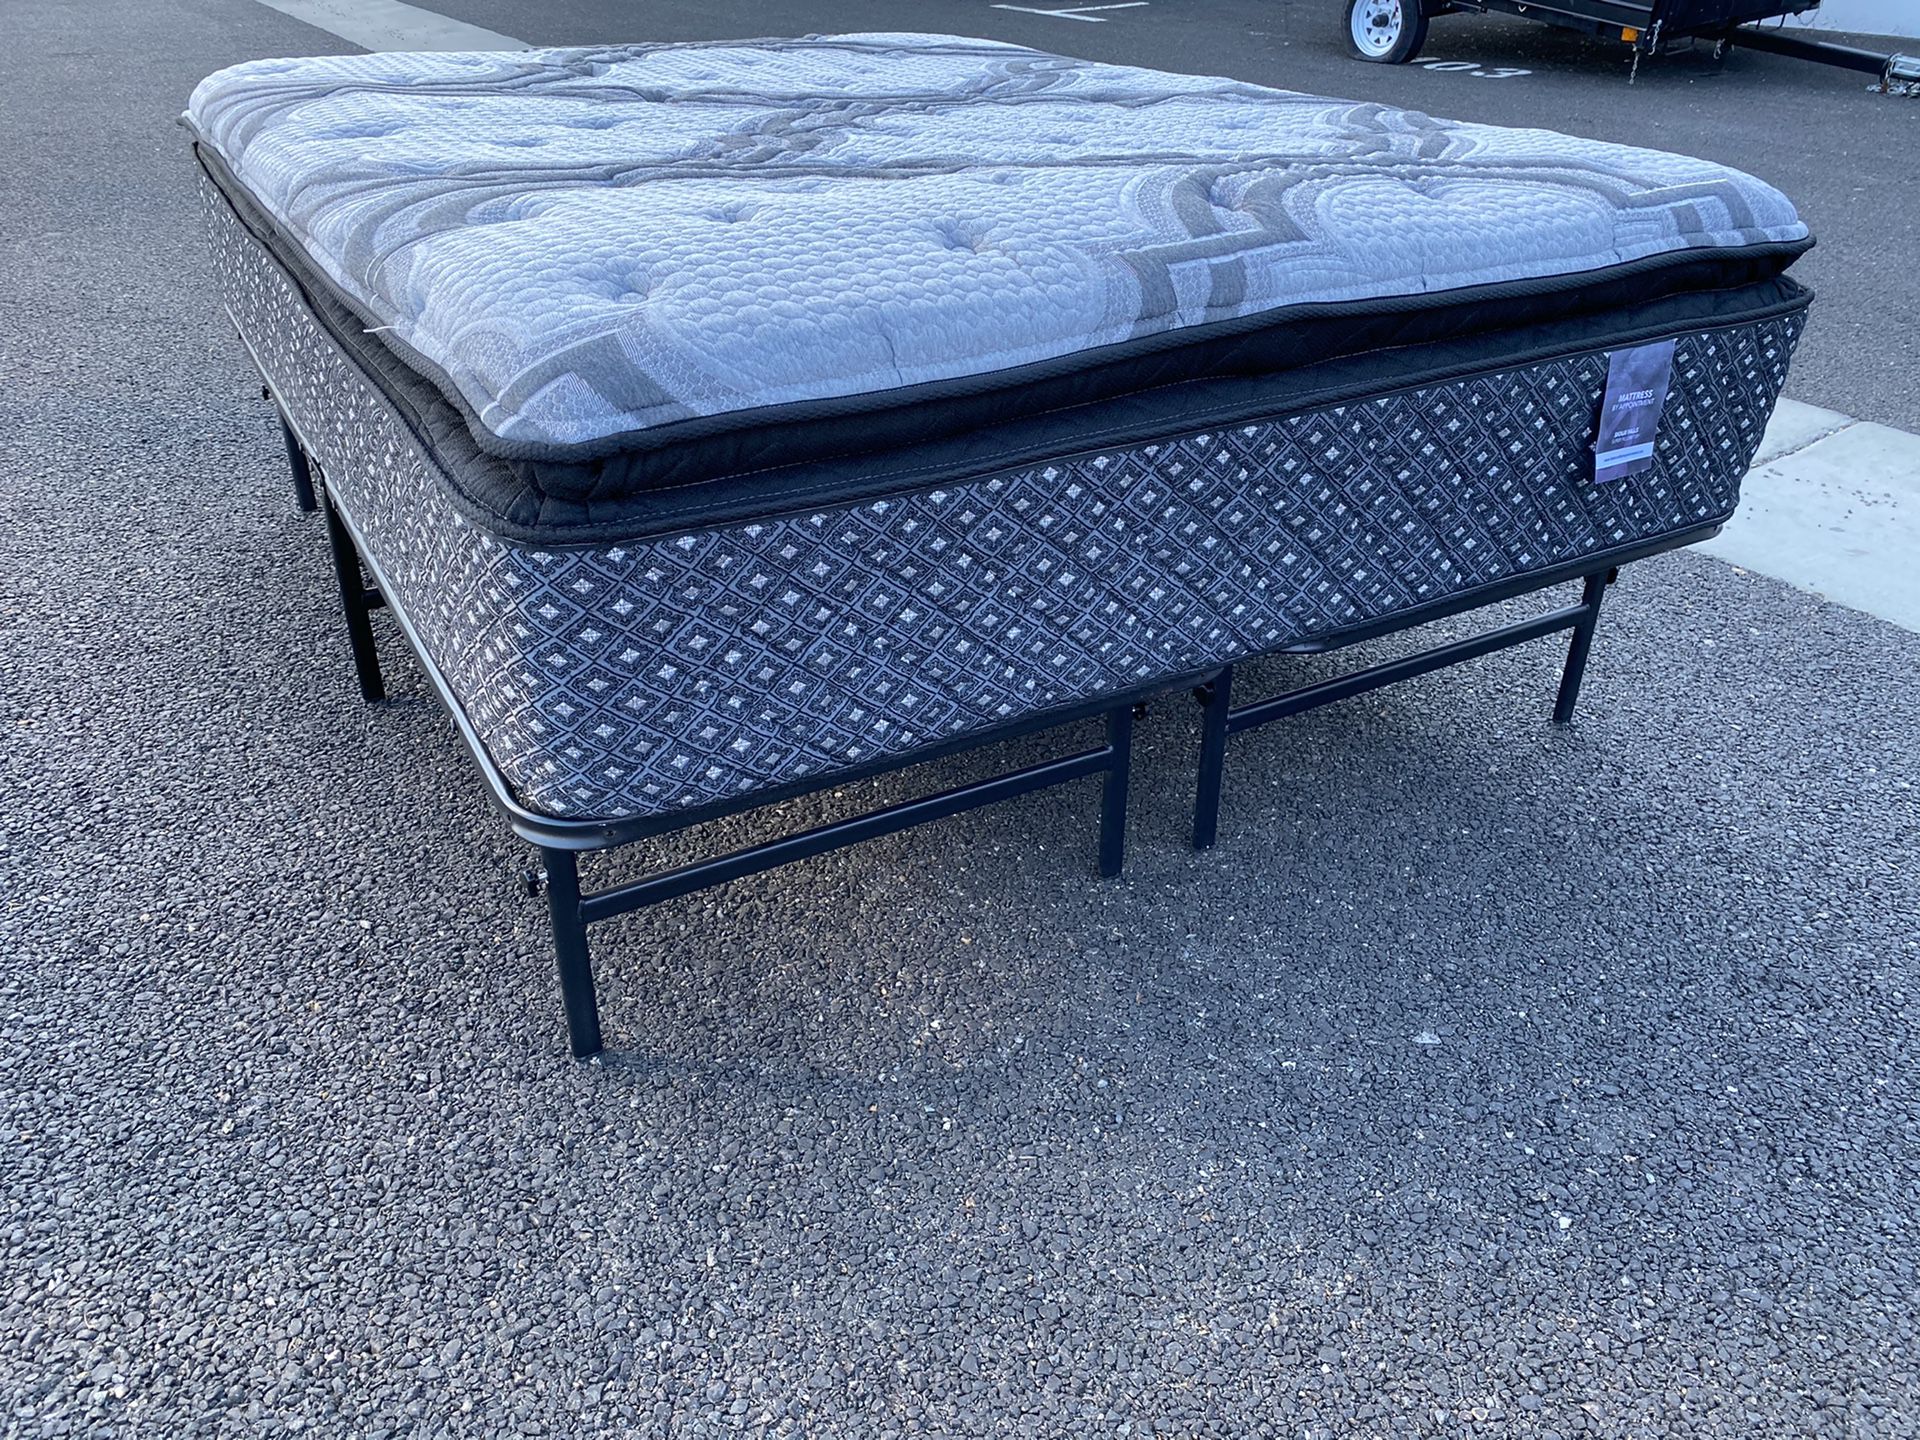 Queen Size Bed ! Pillow top mattress and metal platform frame ! Queen Bed ! Queen size pillow top mattress ! Queen Bed ! Free delivery